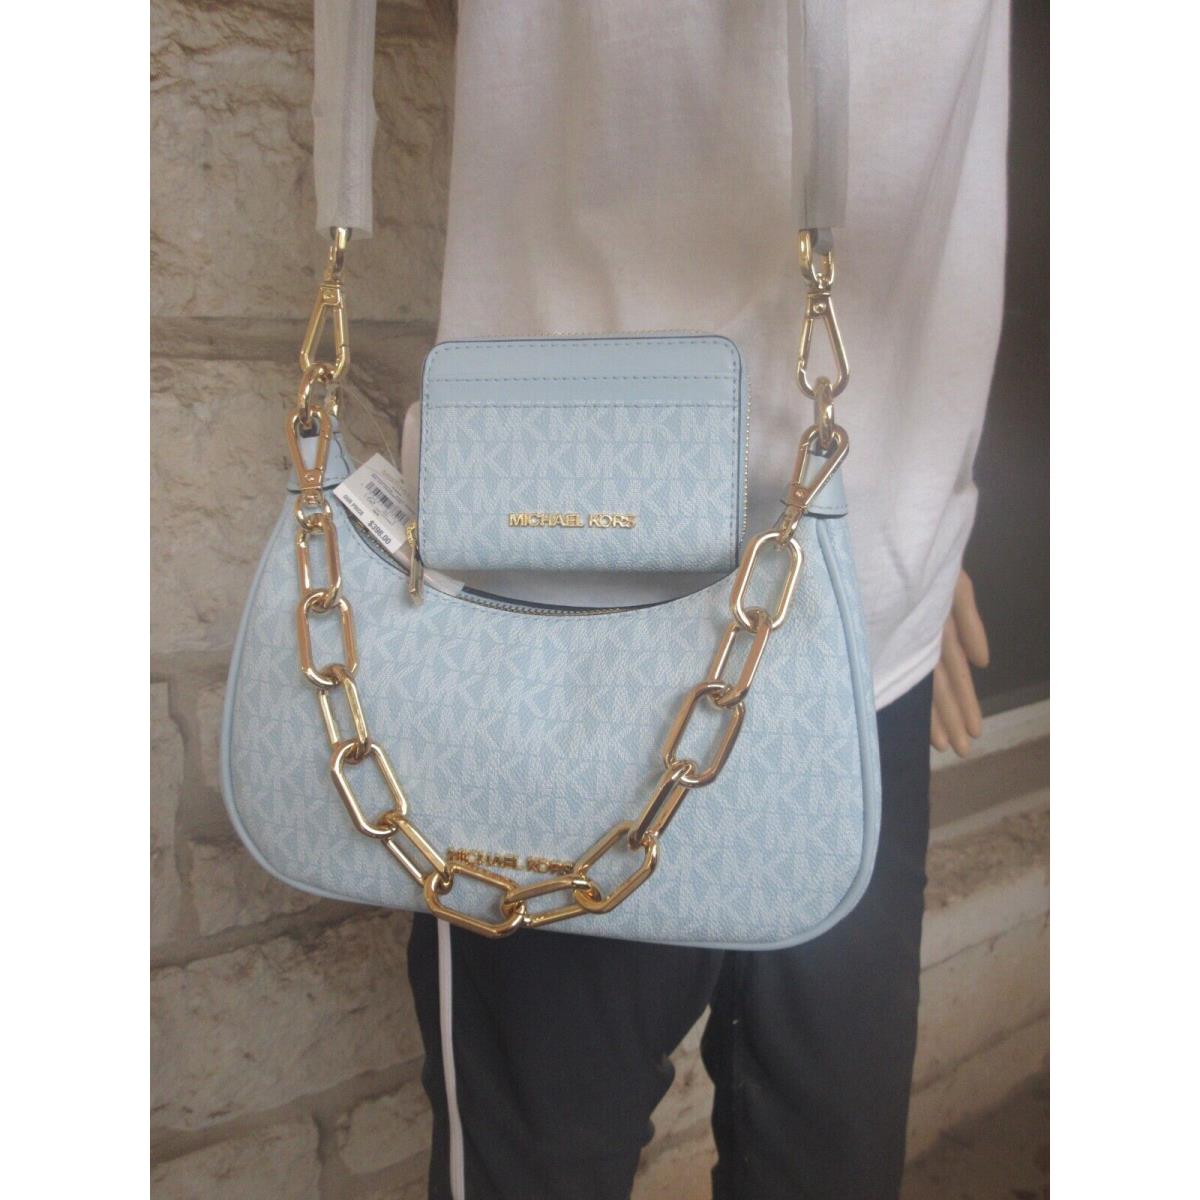 Michael Kors Light Blue Leather Handbag Purse With Gold Chain & Leather  Straps